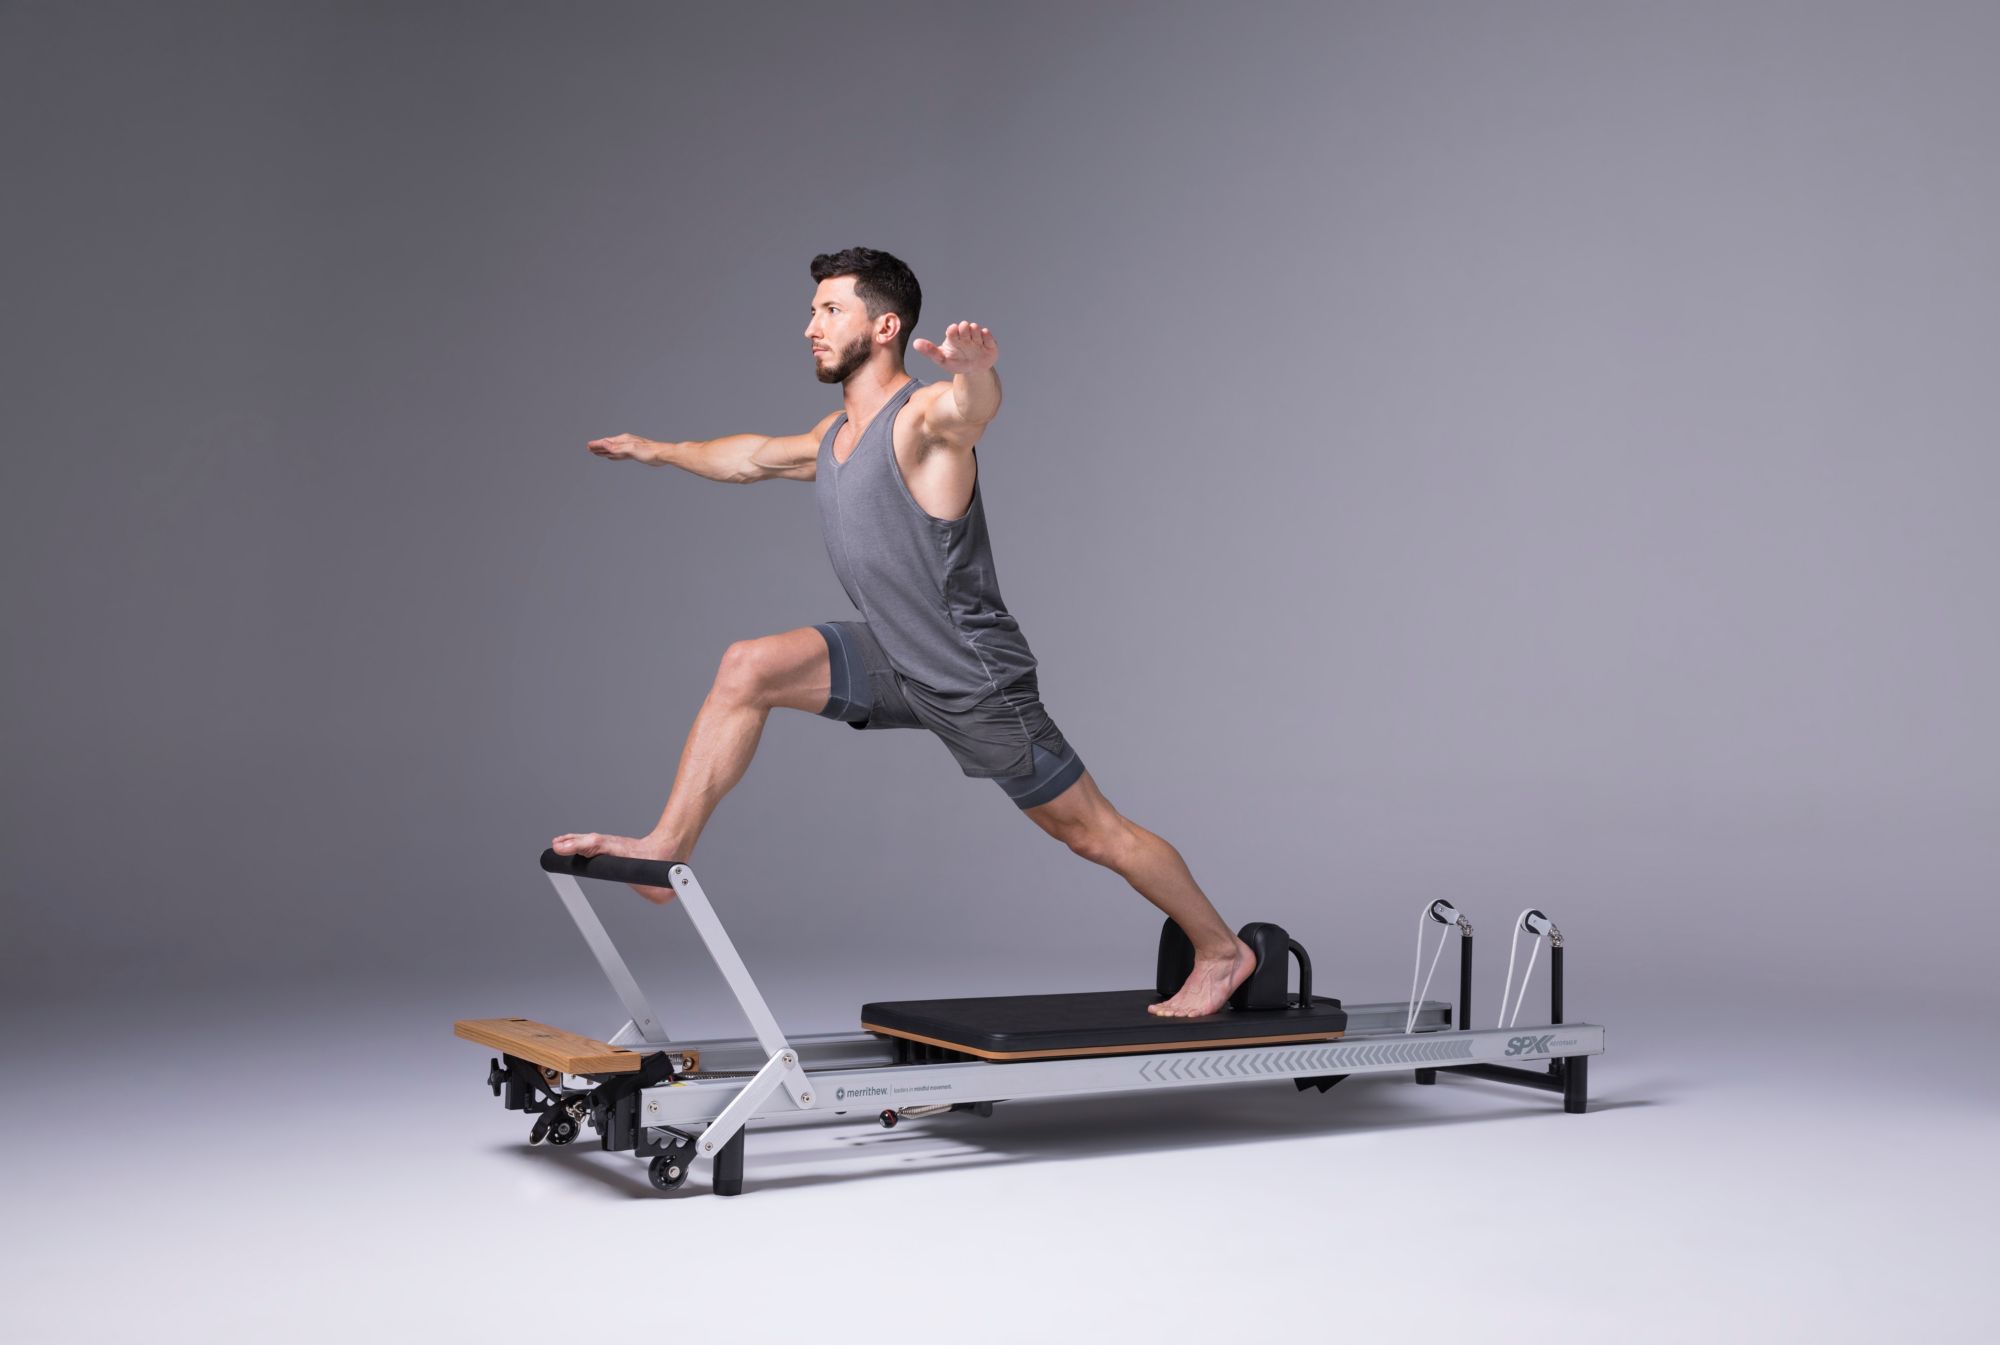 SPX Merrithew Pilates Reformer FOR SALE - sporting goods - by